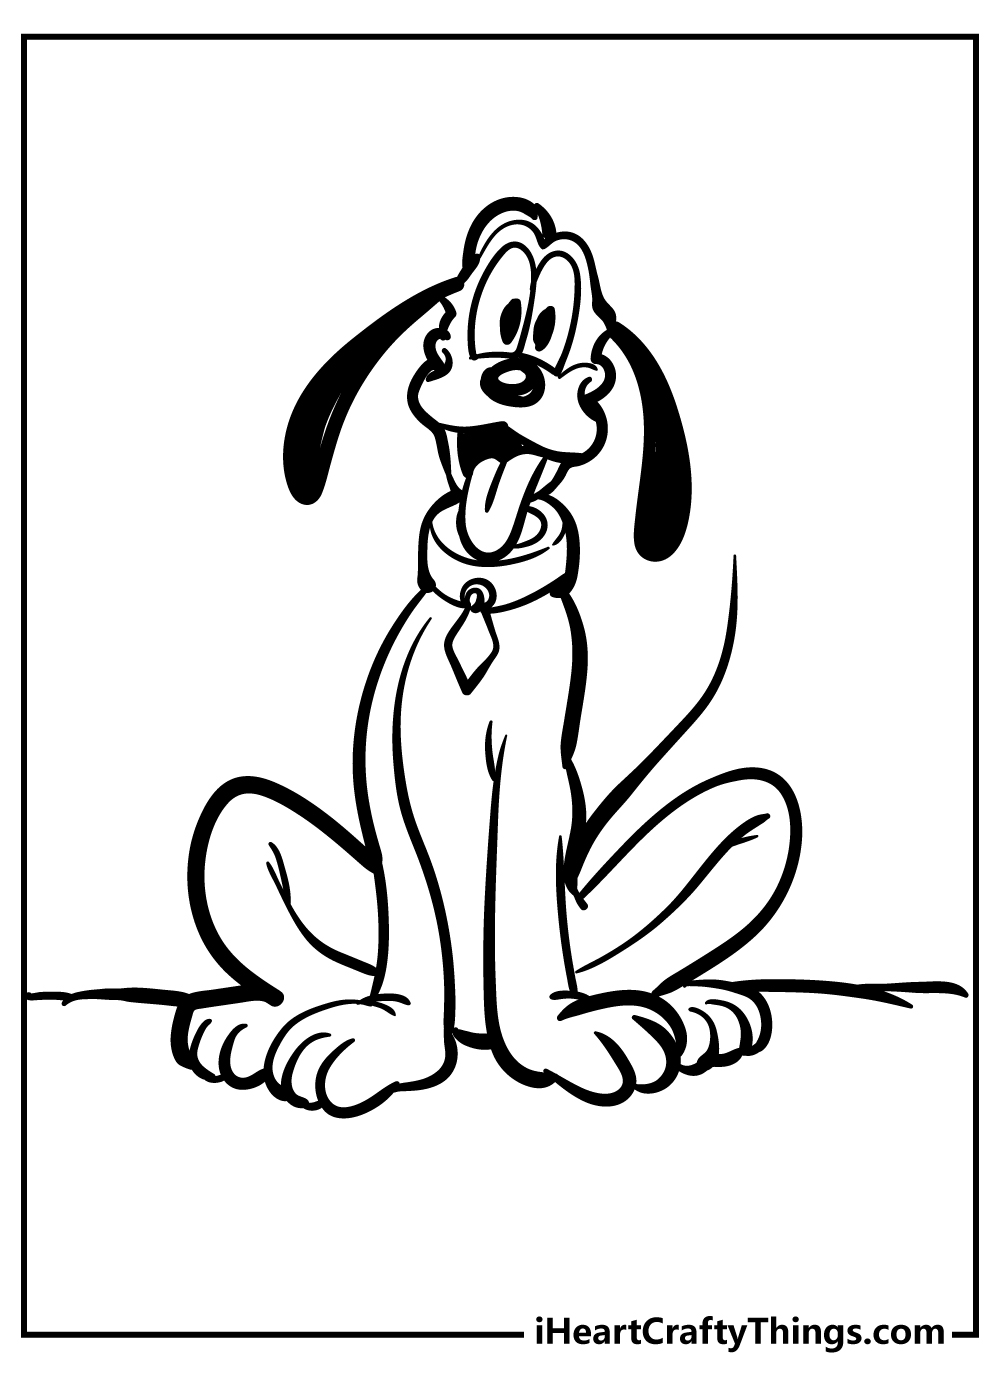 Pluto Coloring Pages free pdf download